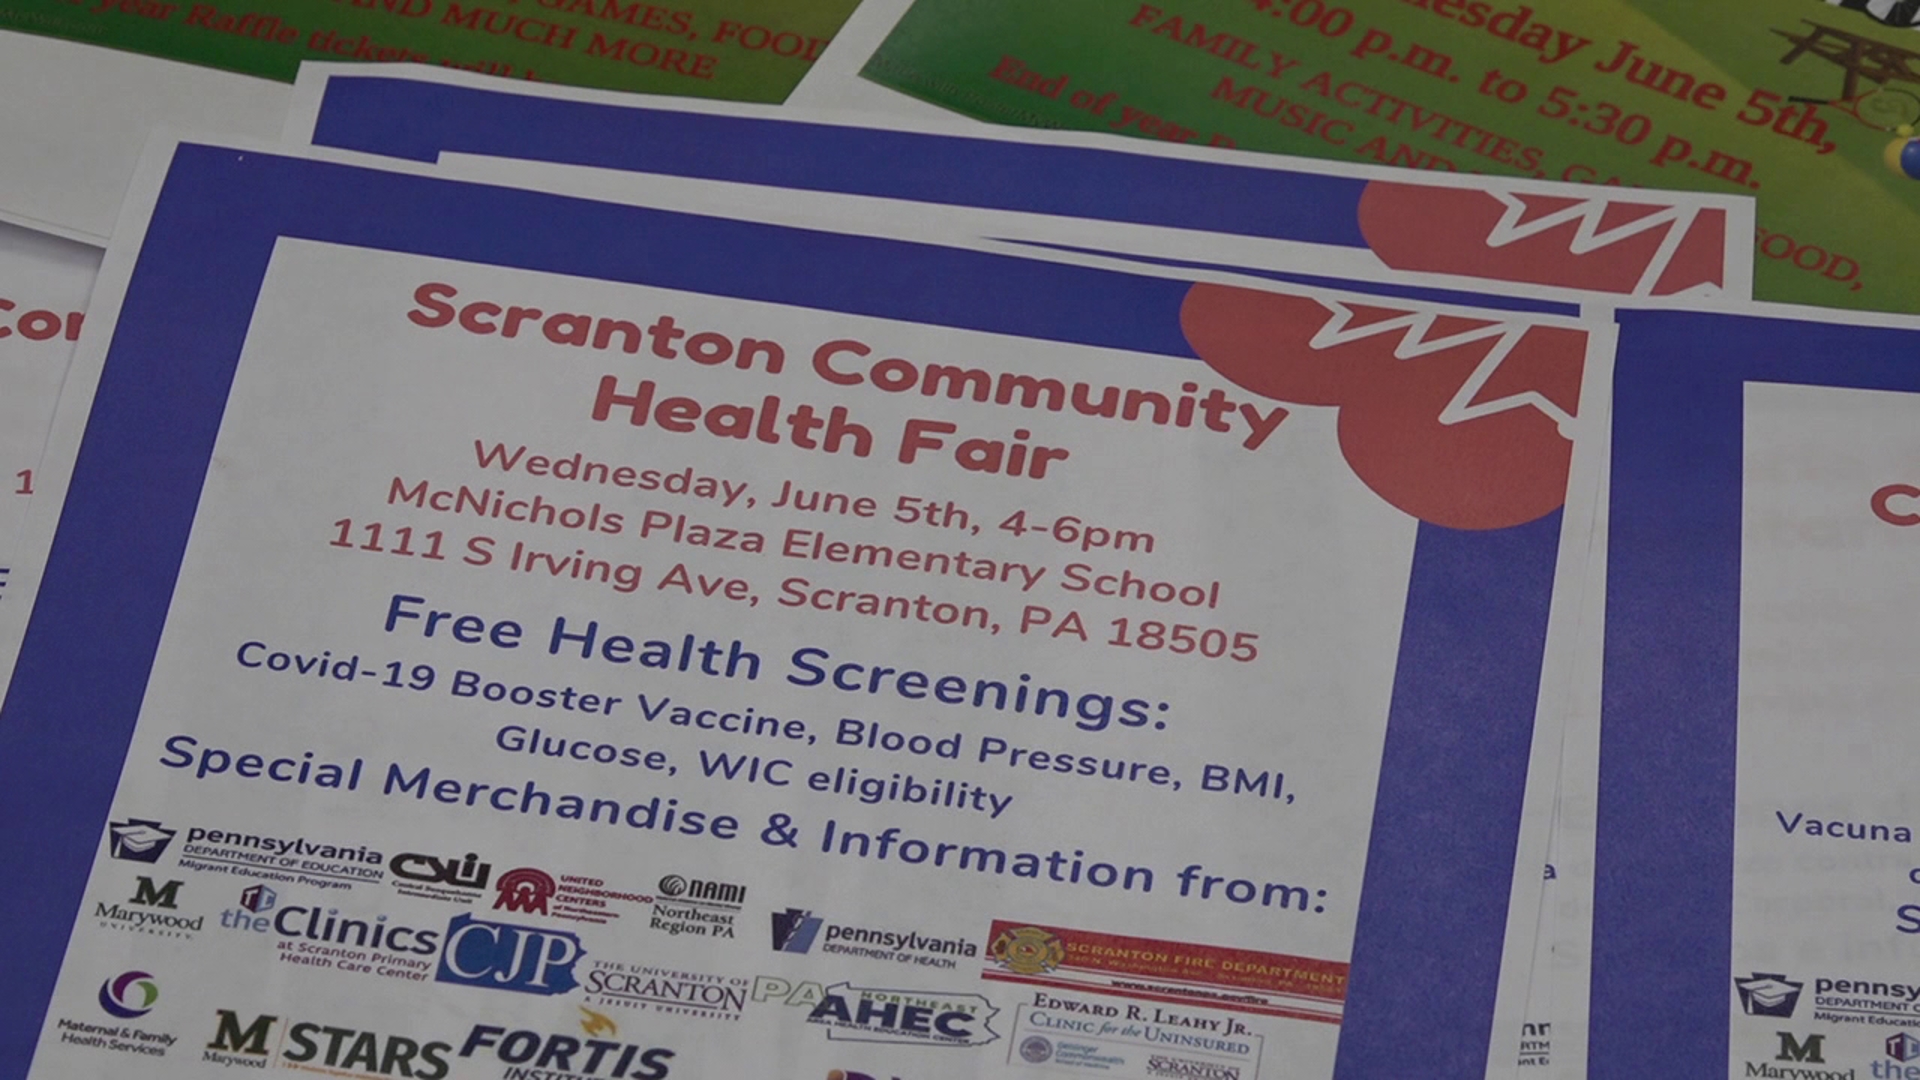 Organizers are getting ready for the second Stars Health Fair clinic at McNichols Plaza Elementary School on June 5th in Scranton.